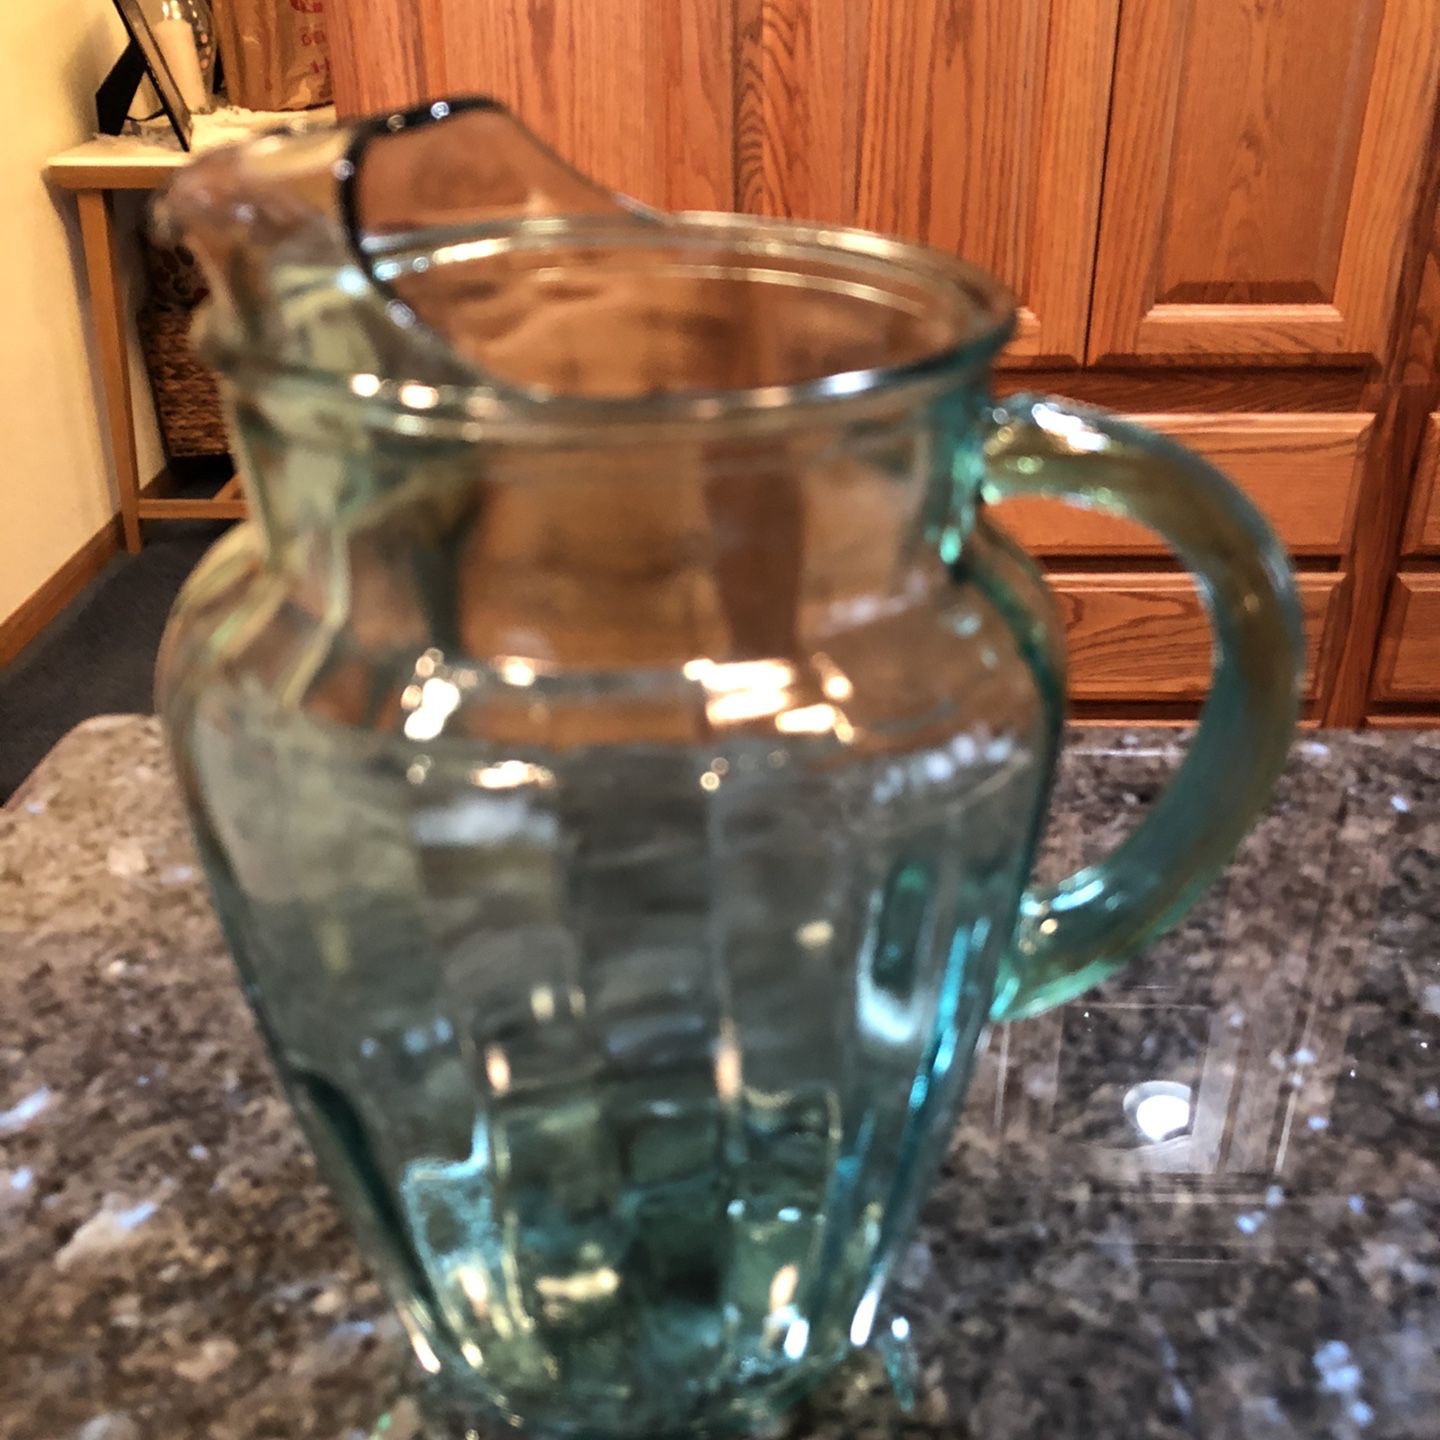 Vintage Depression Glass Turquoise Blue Water Pitcher Perfect Condition 8 inches tall